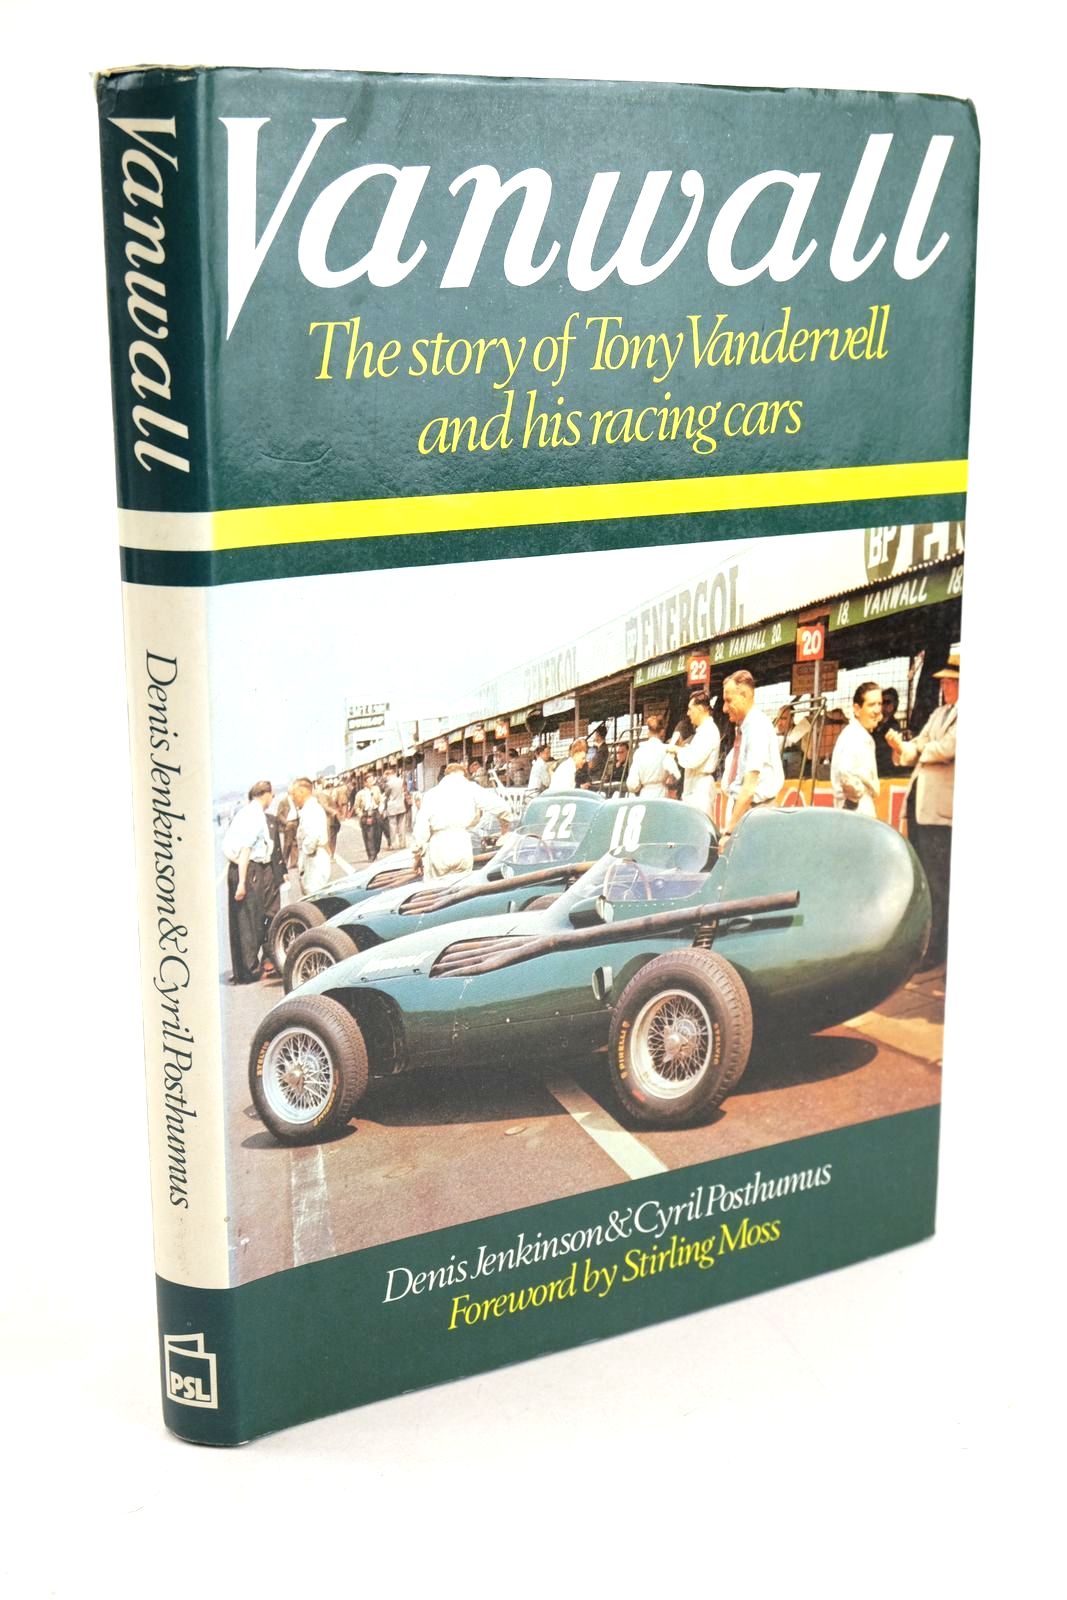 Photo of VANWALL: THE STORY OF TONY VANDERVELL AND HIS RACING CARS written by Jenkinson, Denis Posthumus, Cyril published by Patrick Stephens (STOCK CODE: 1327471)  for sale by Stella & Rose's Books